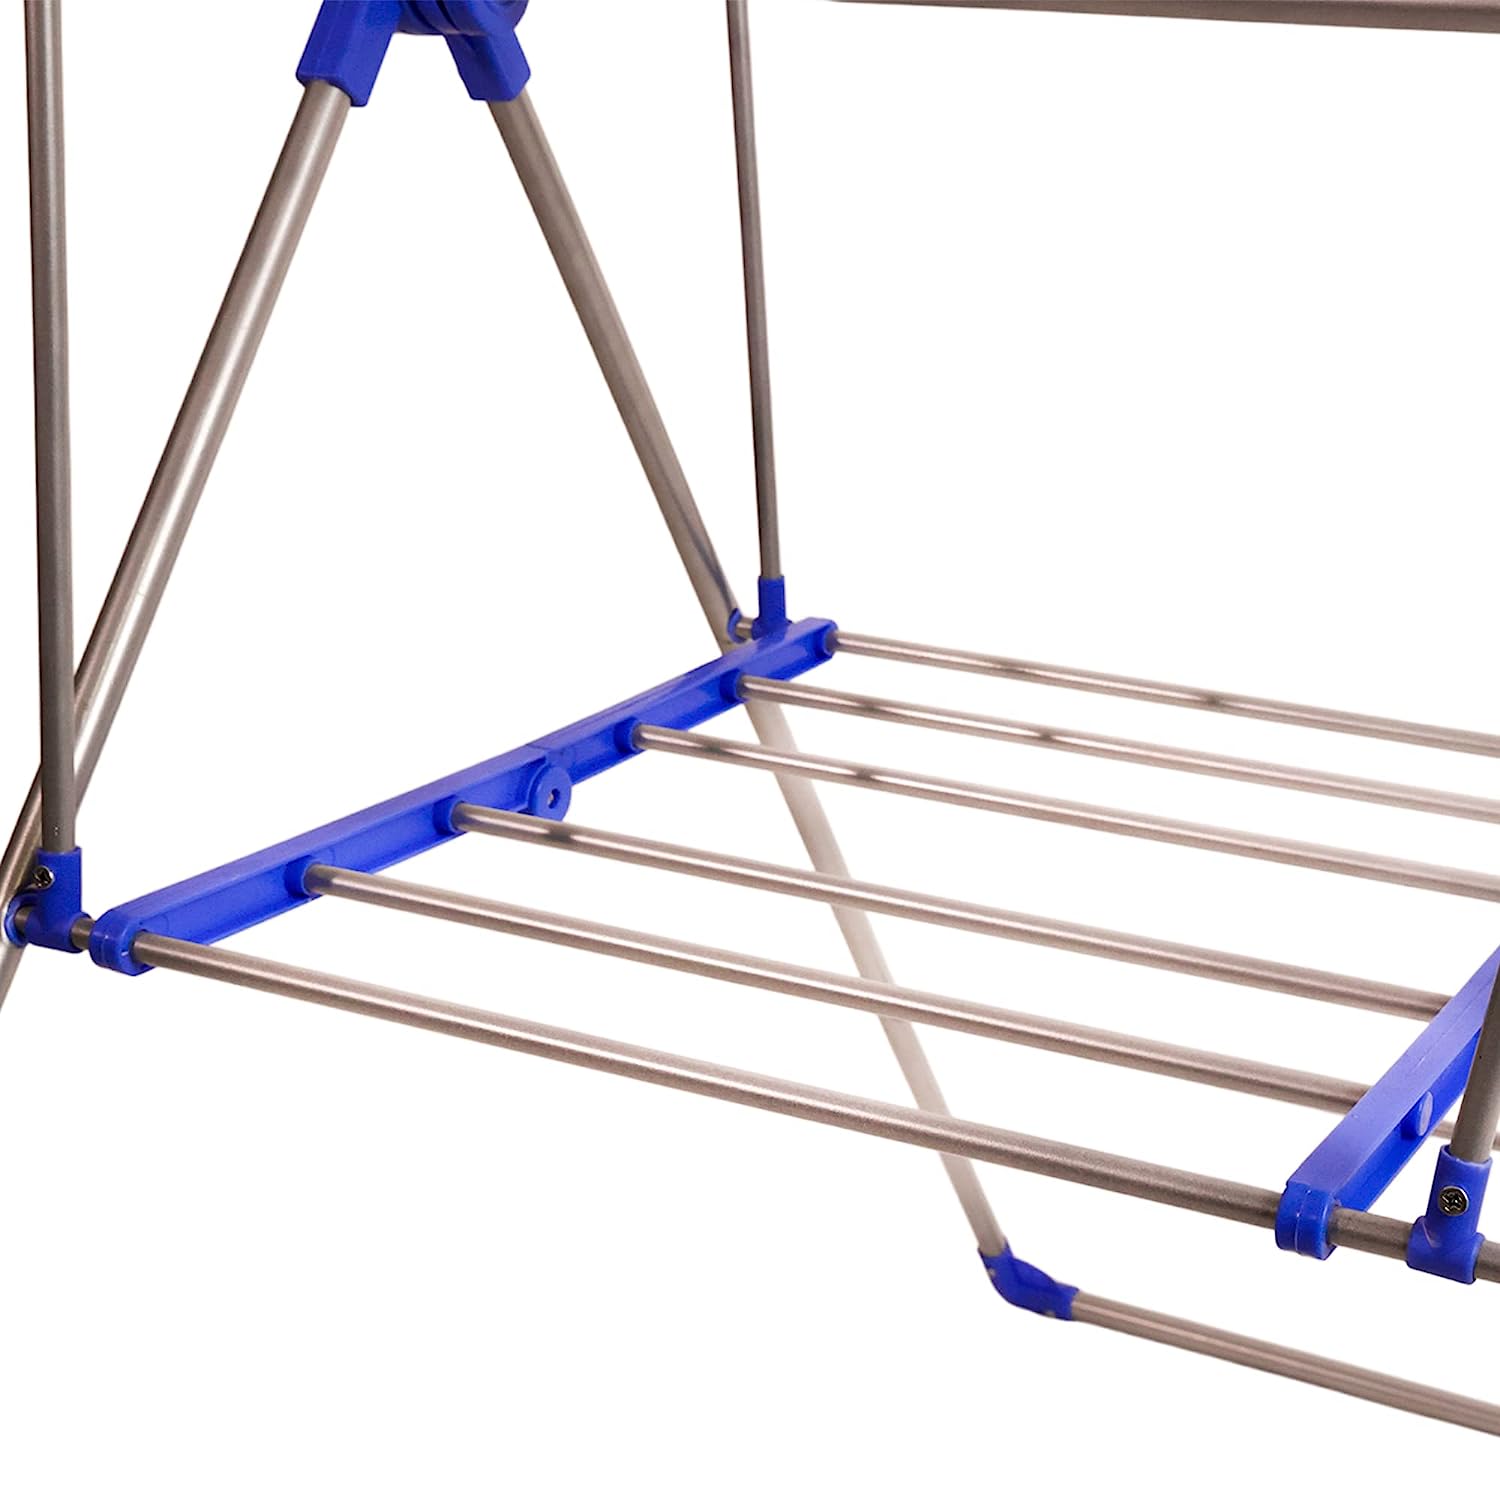 Gullwing Master Cloth Drying Stand  | Collapsible Clothes Drying Laundry Rack with Hanging Rods I Blue